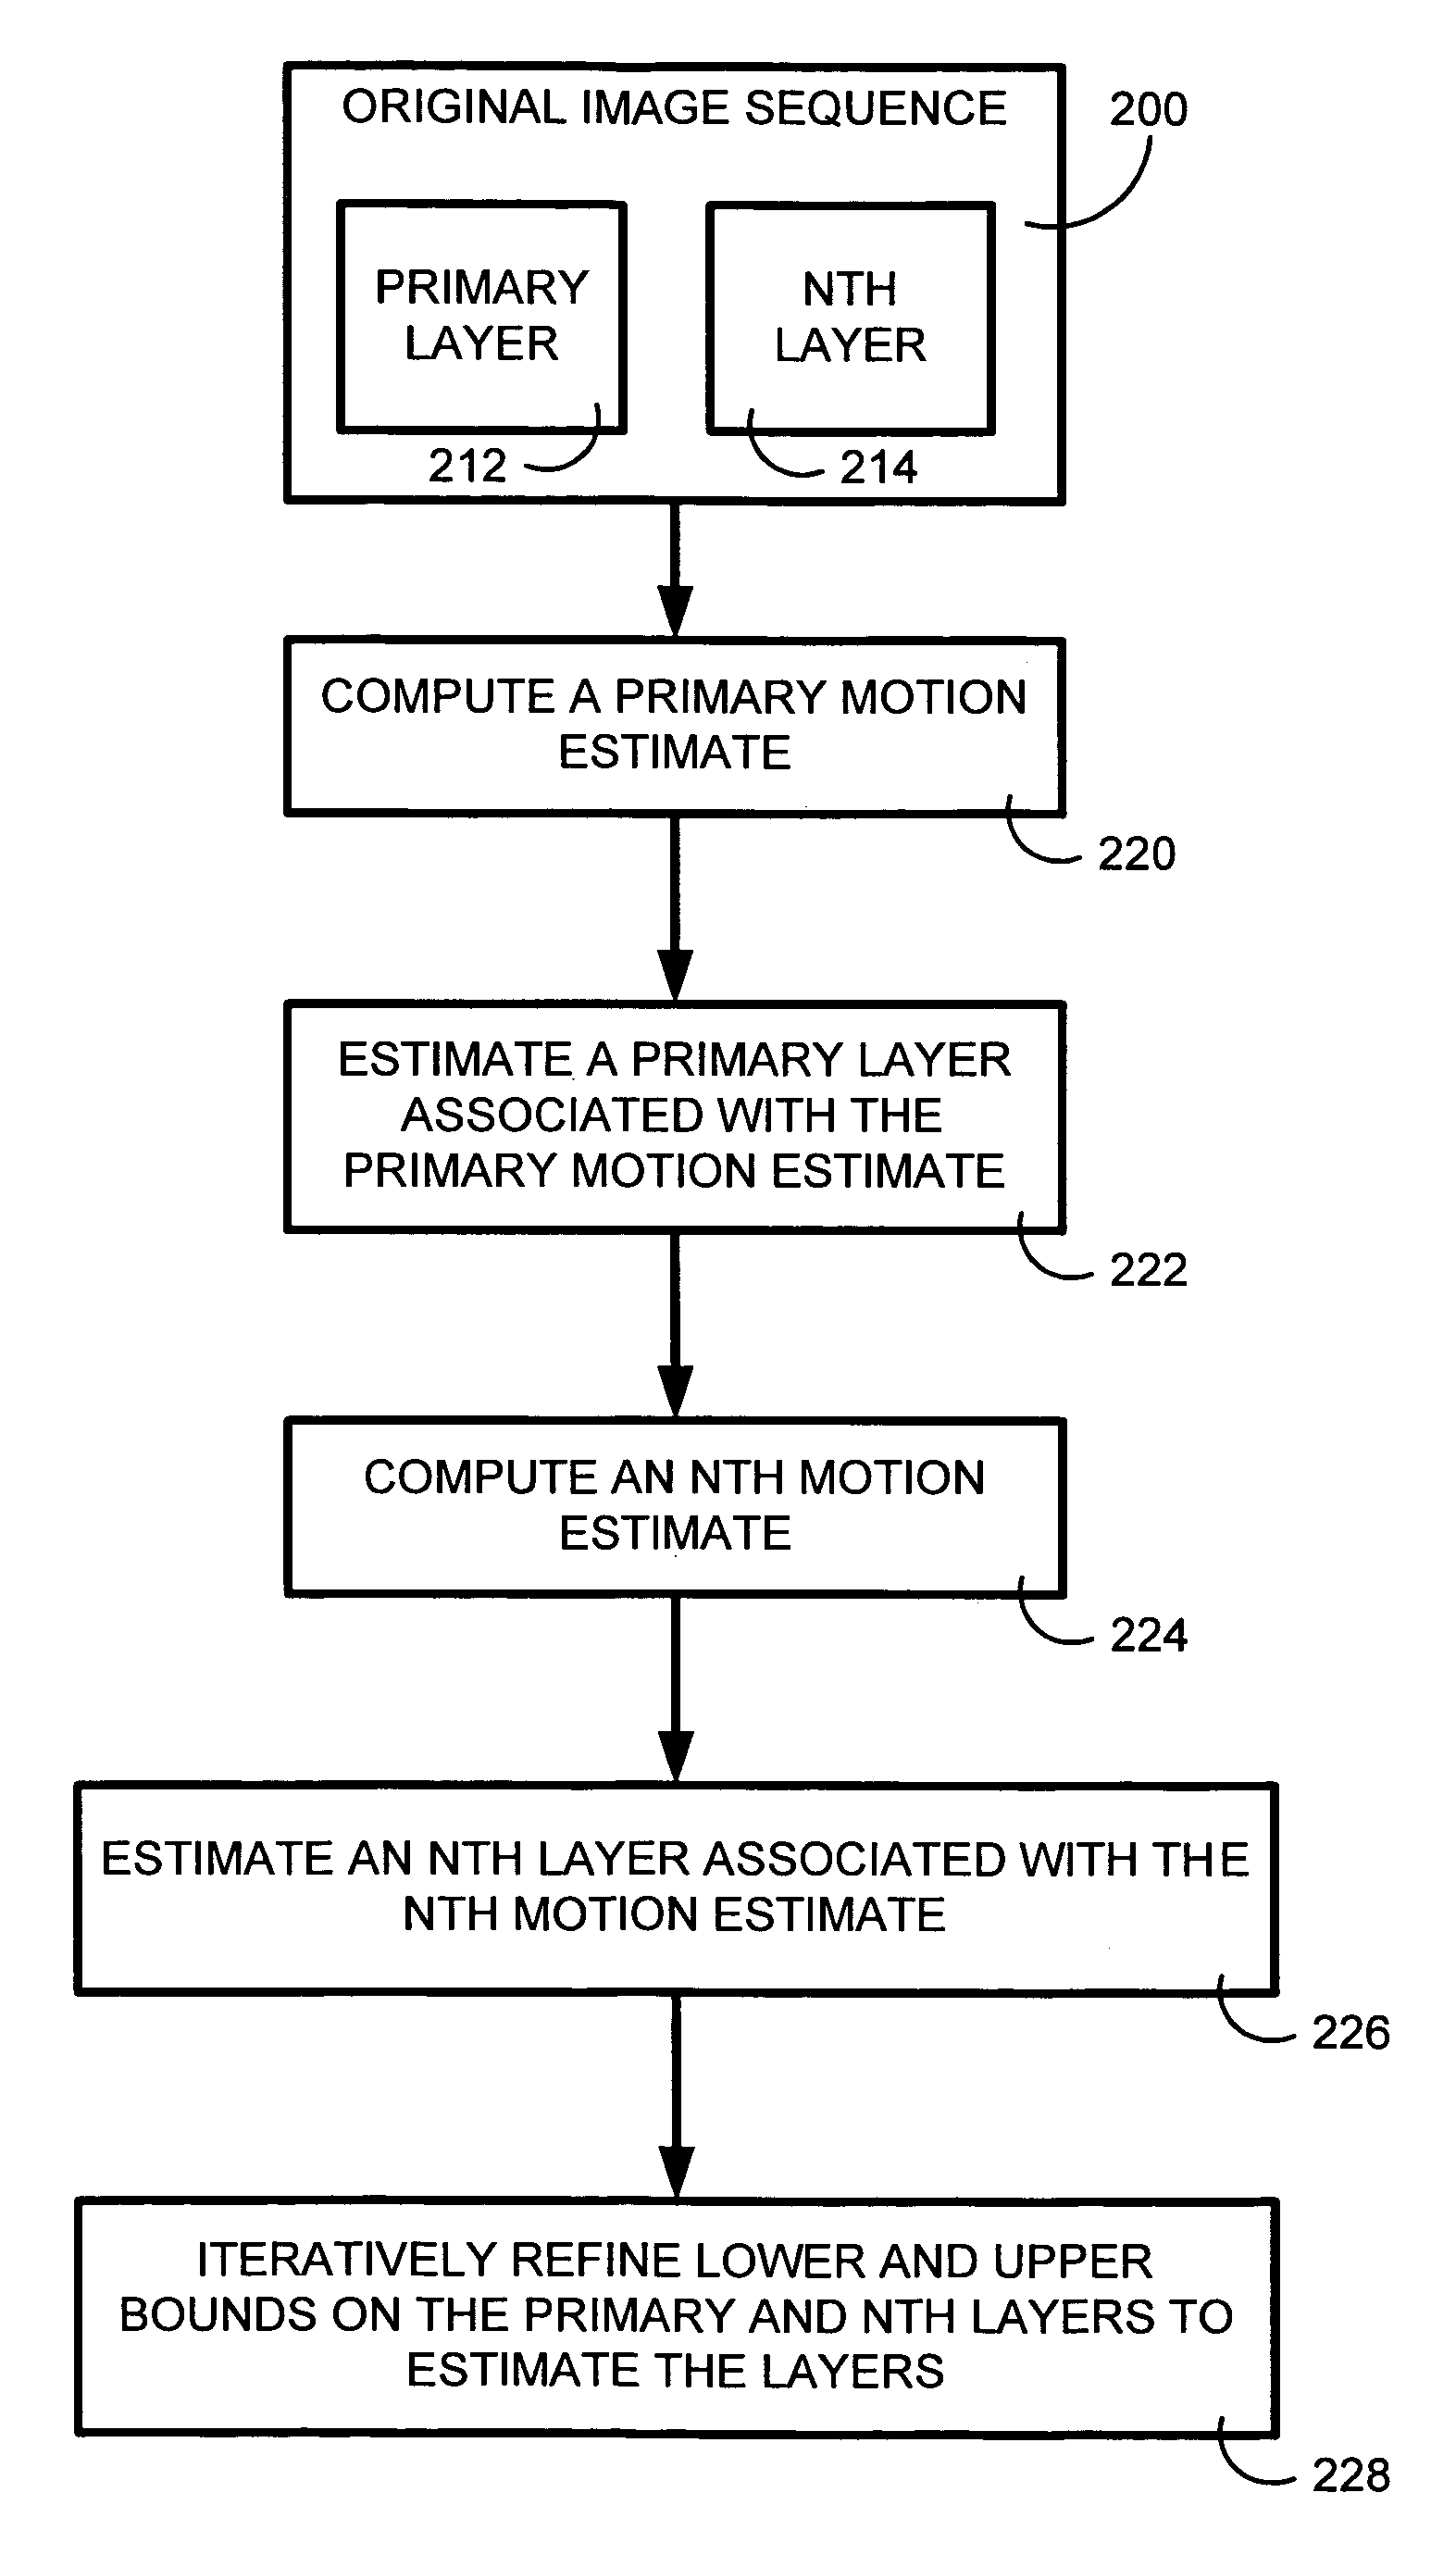 System and method for extracting reflection and transparency layers from multiple images